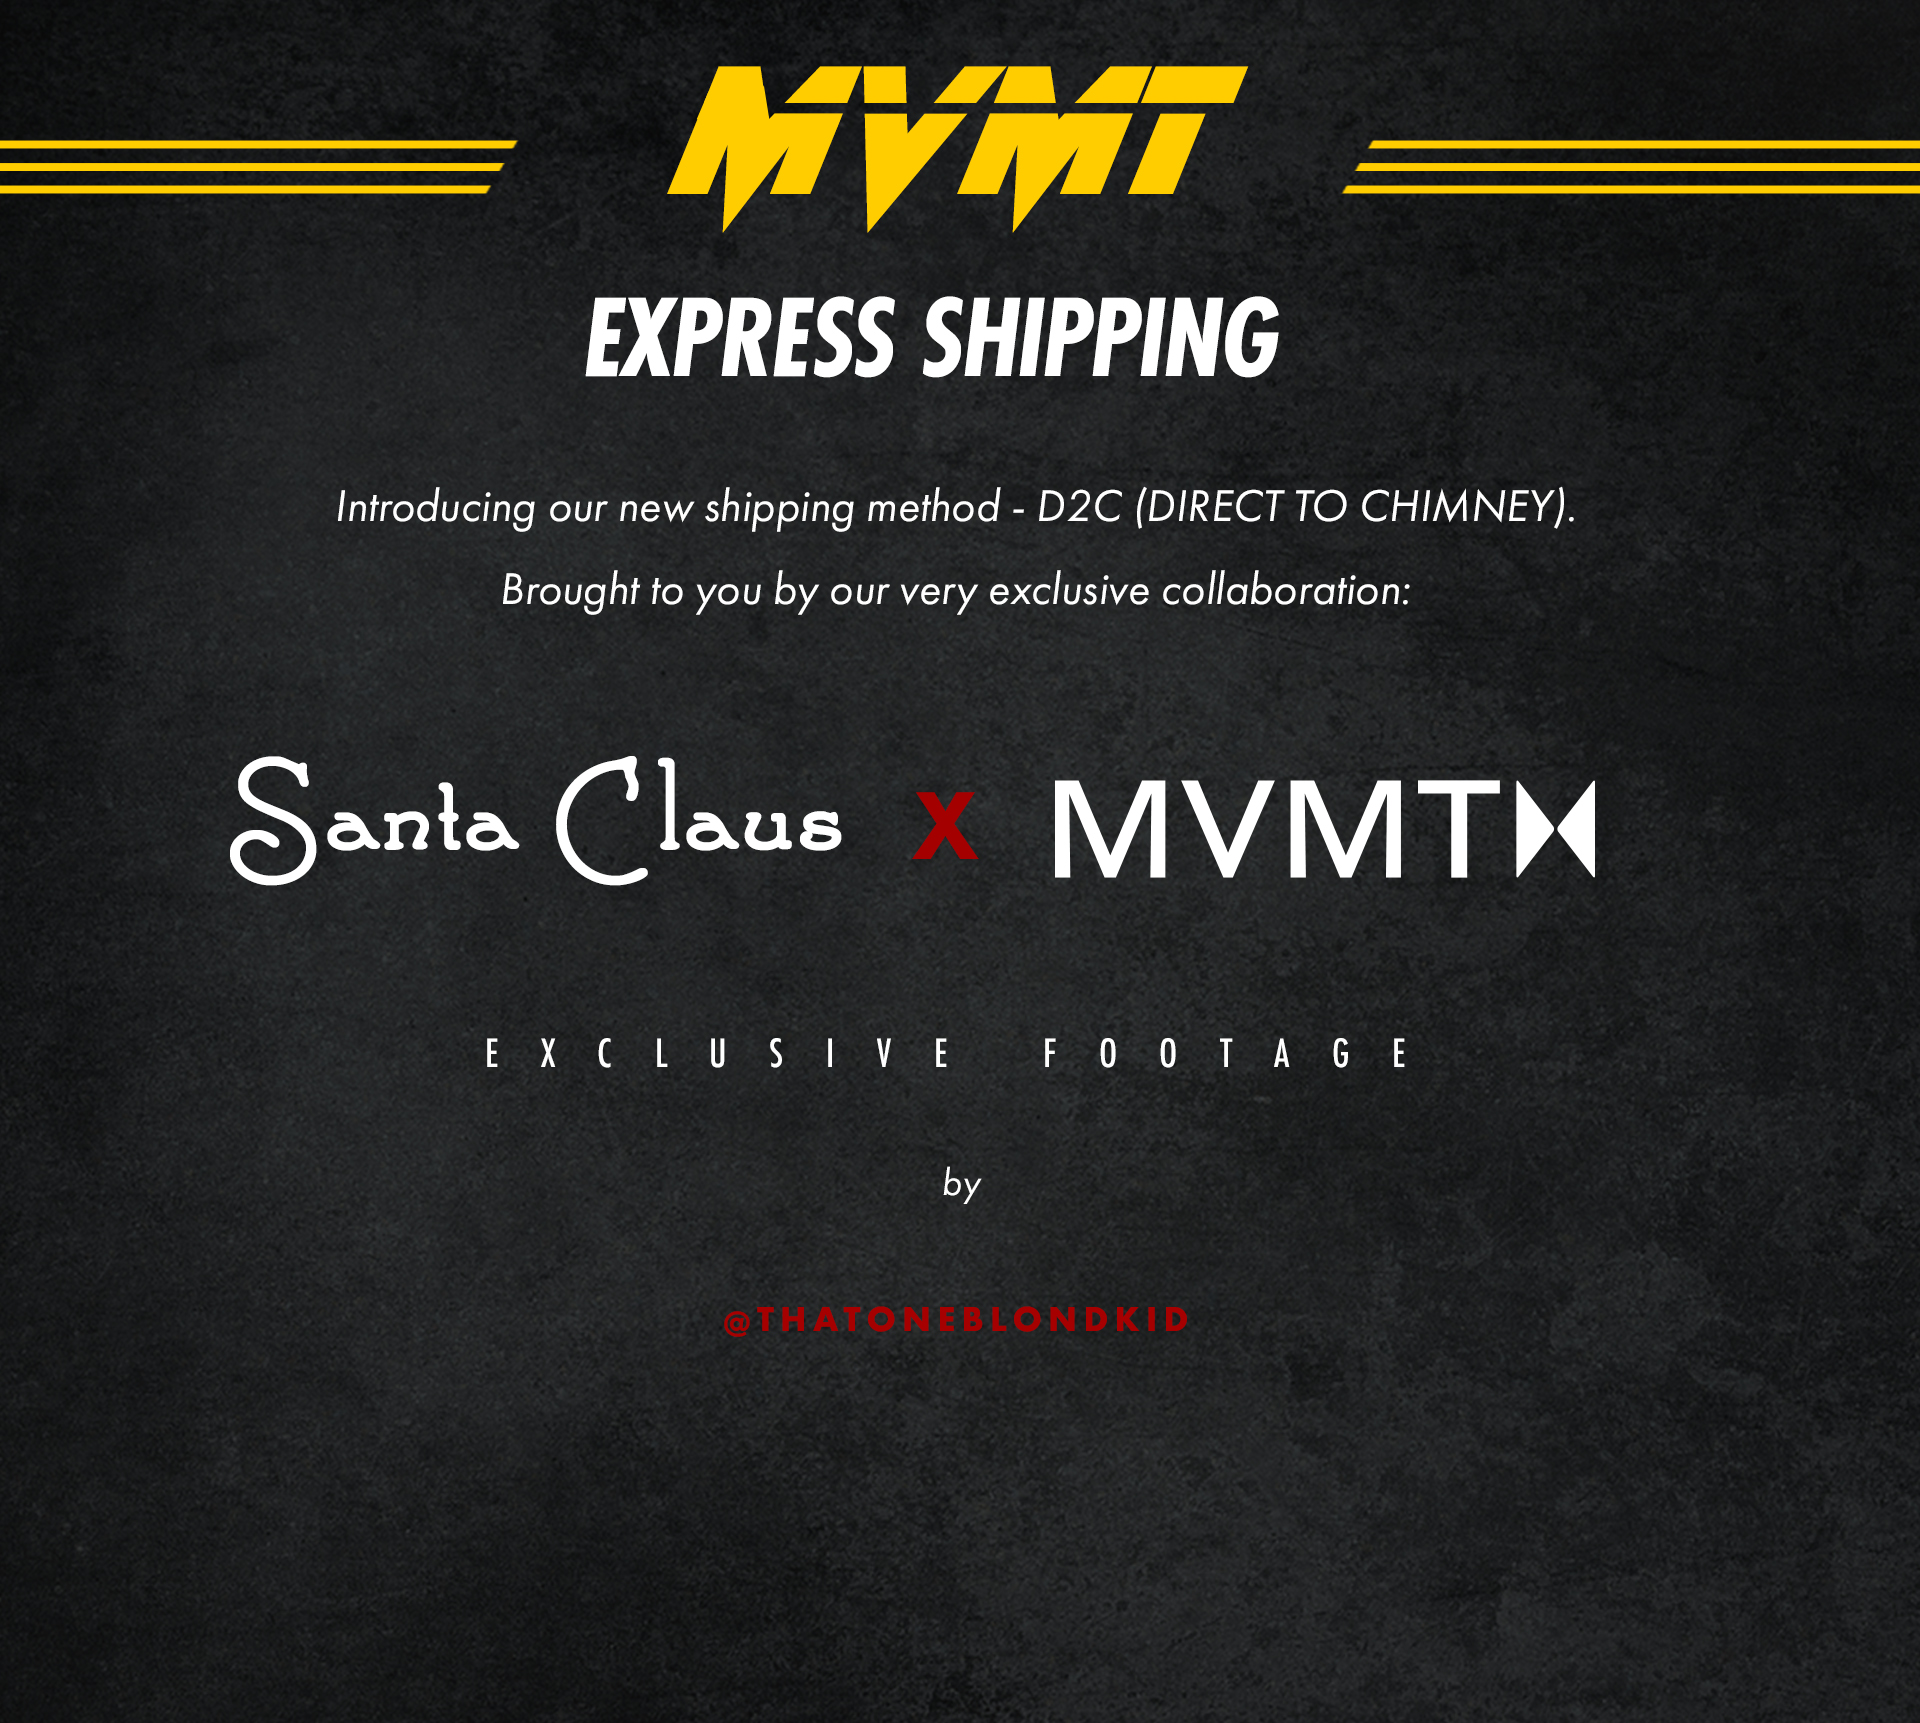 MVMT Express Shipping. Introducing our new shipping method - D2C (Direct To Chimney). Brought to you by our very exclusive colllaboration: Santa Claus x MVMT. Exclusive footage by @thatoneblondkid